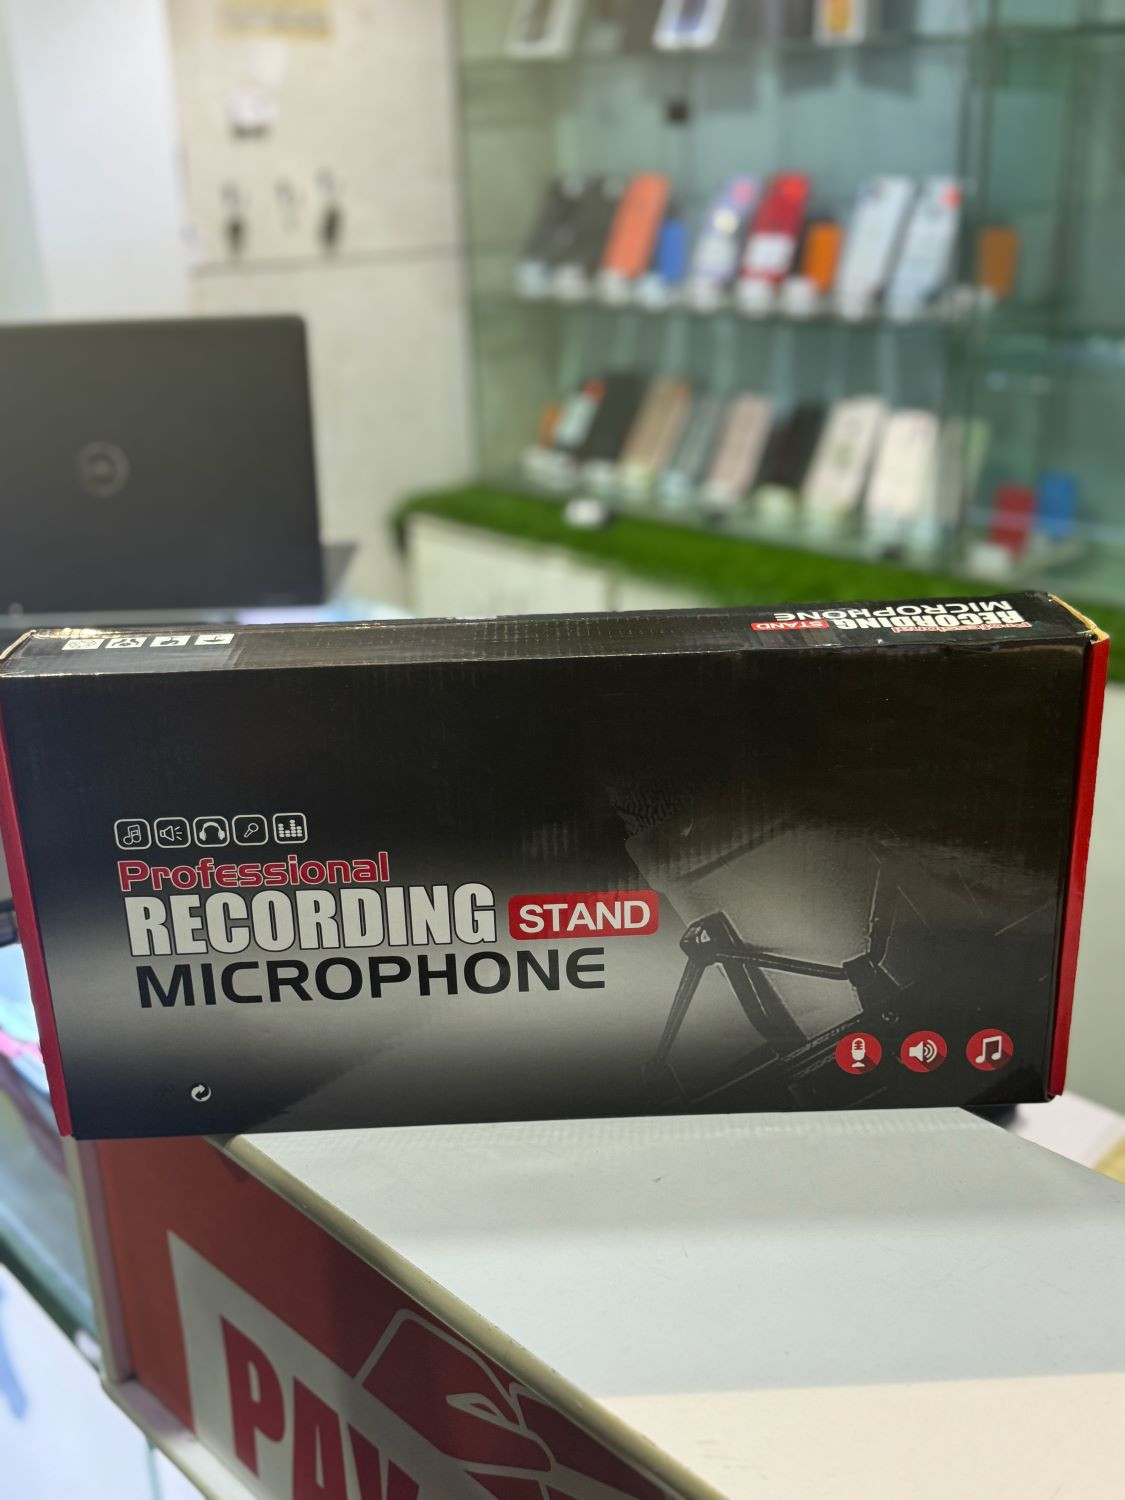 Professional Recording Stand Microphone